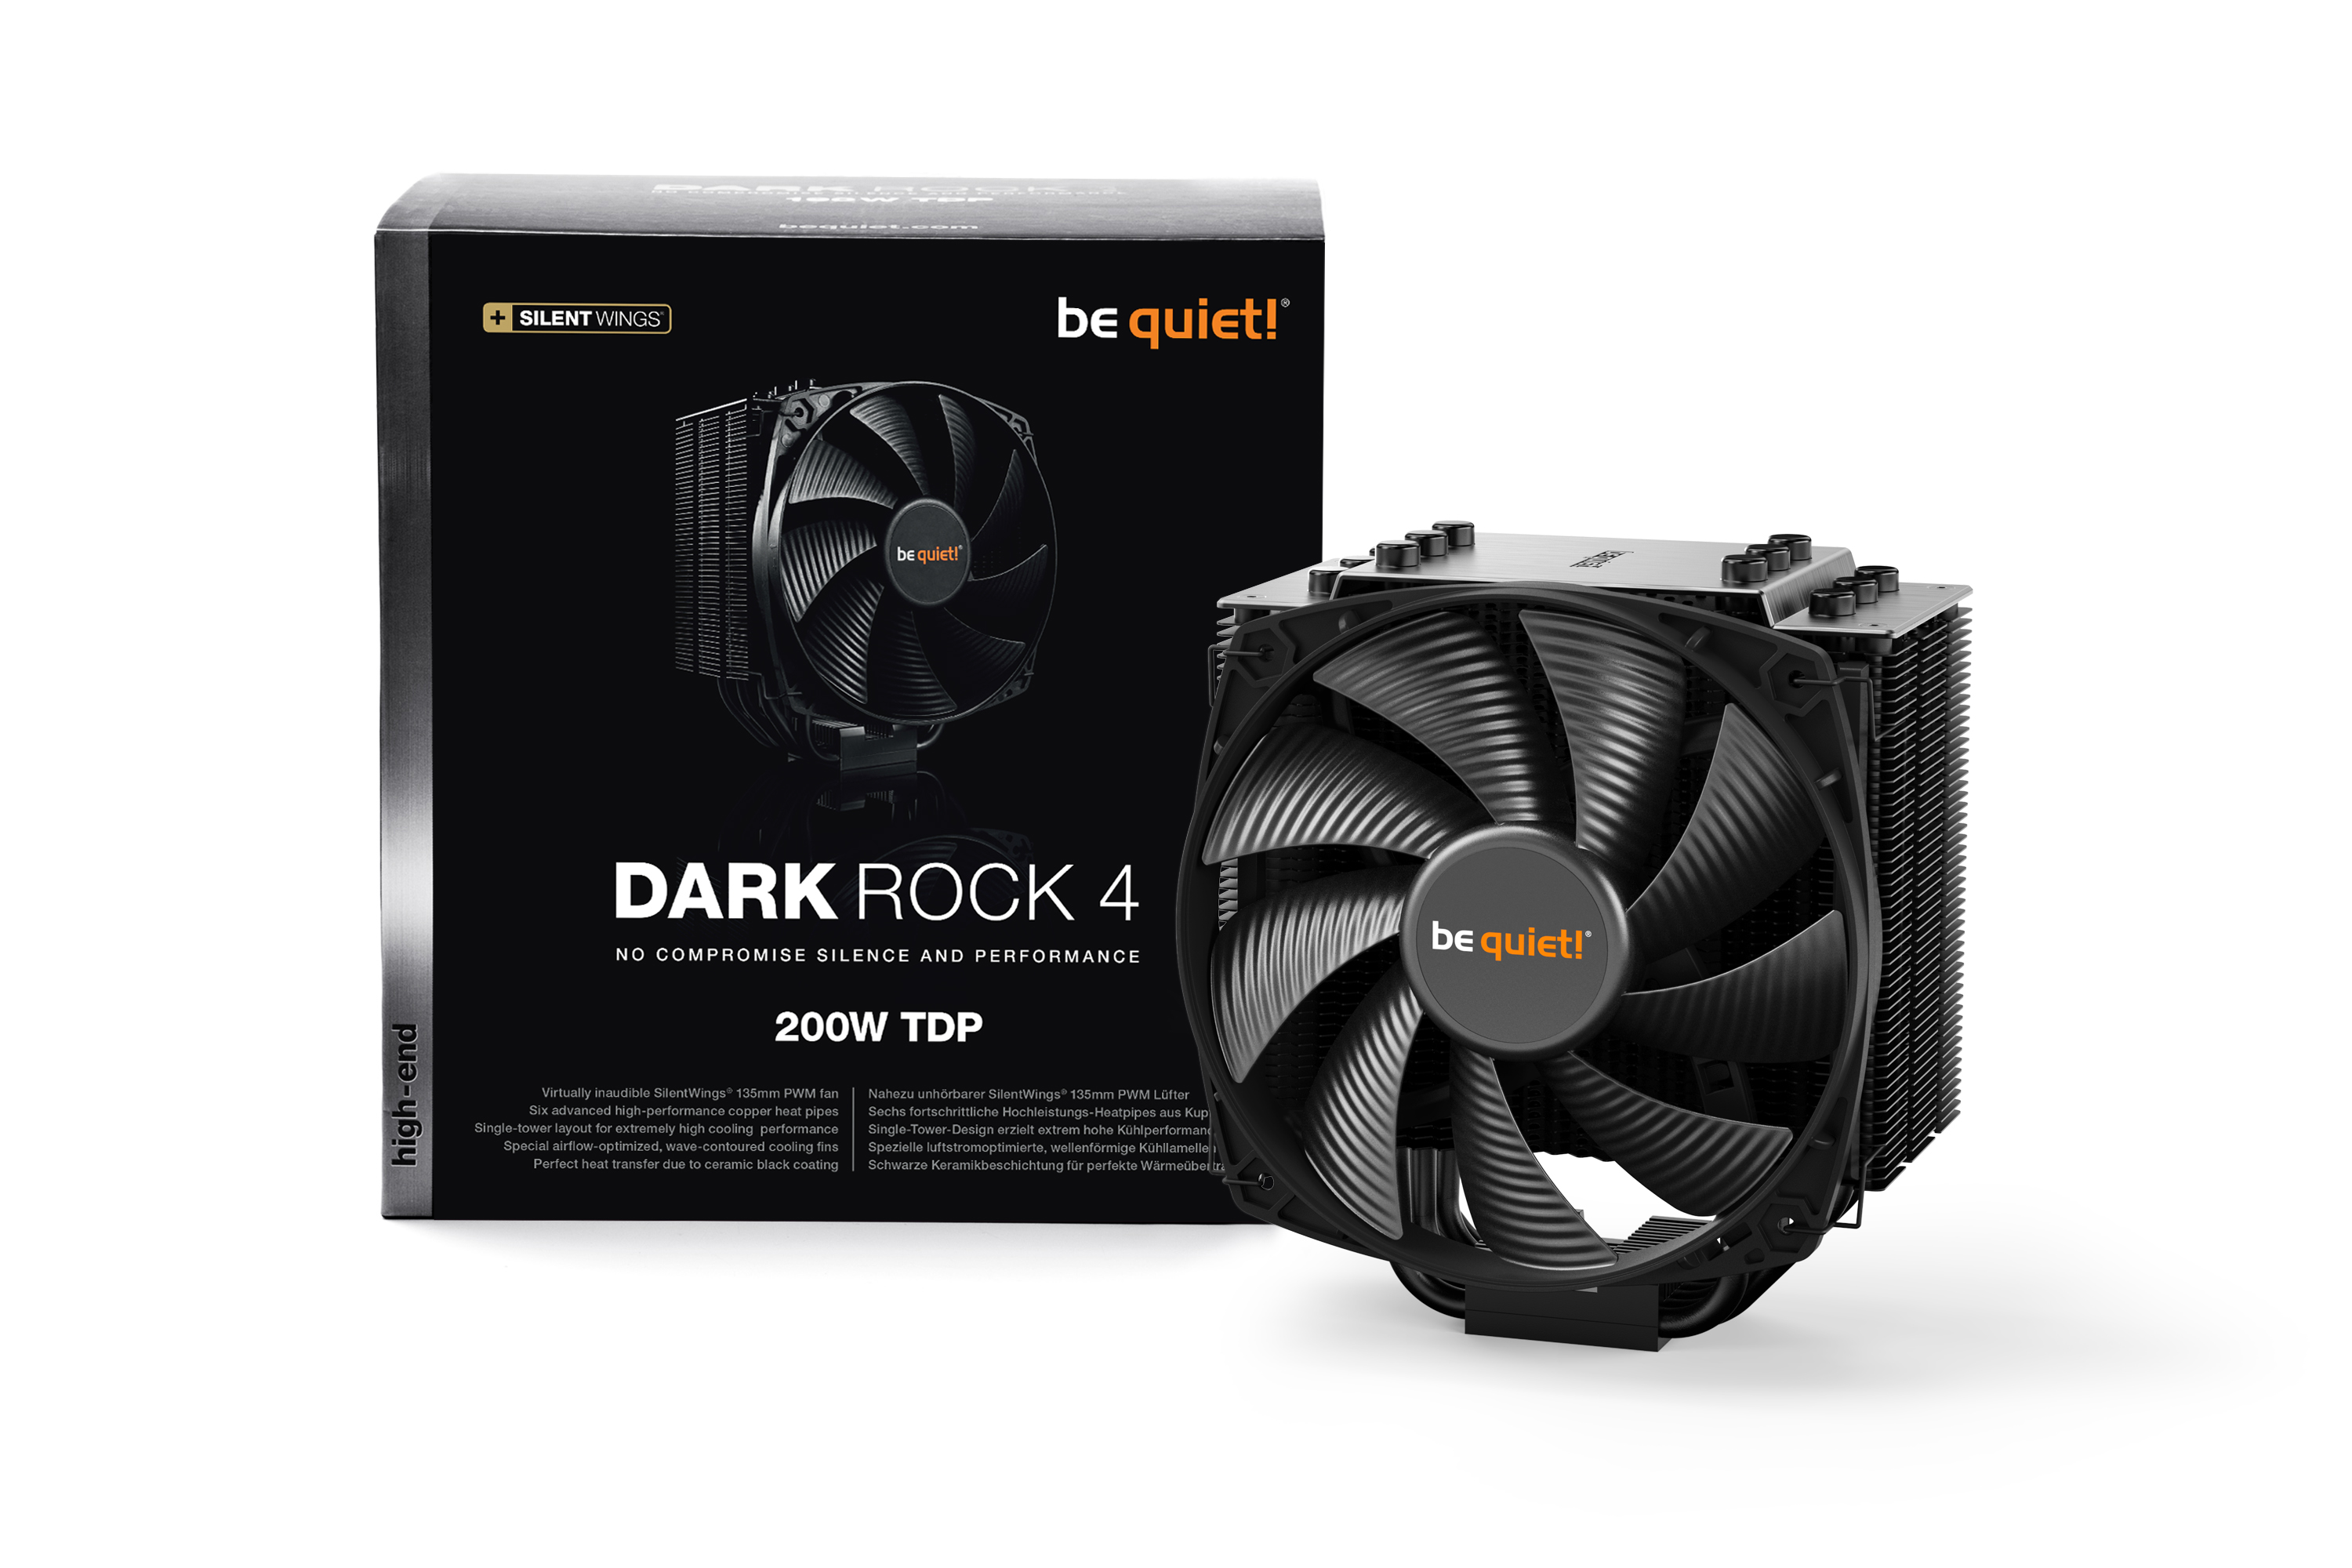 PURE ROCK 2 silent essential Air coolers from be quiet!